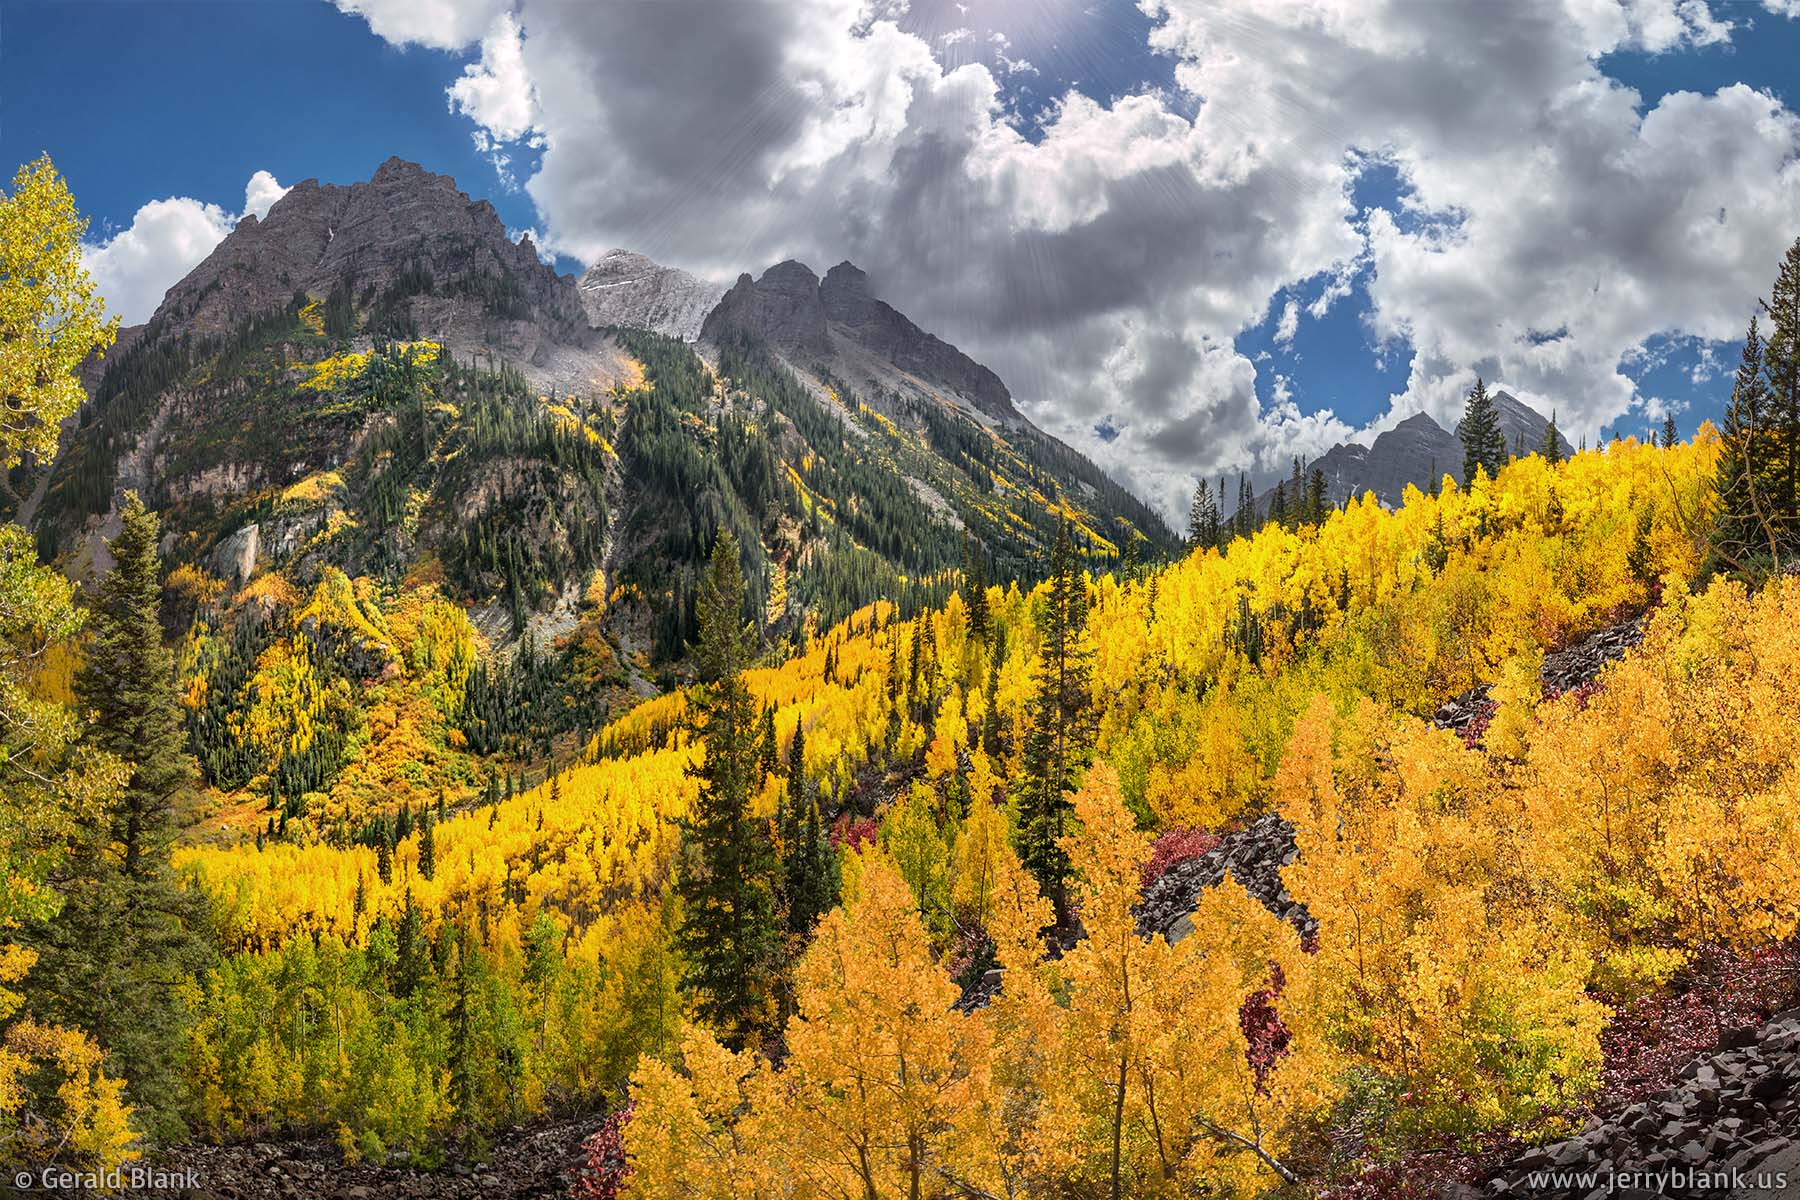 #42600 - Aspens north of Pyramid Peak are set alight by the afternoon sun, in Colorado’s Maroon-Snowmass Wilderness Area - photo by Jerry Blank